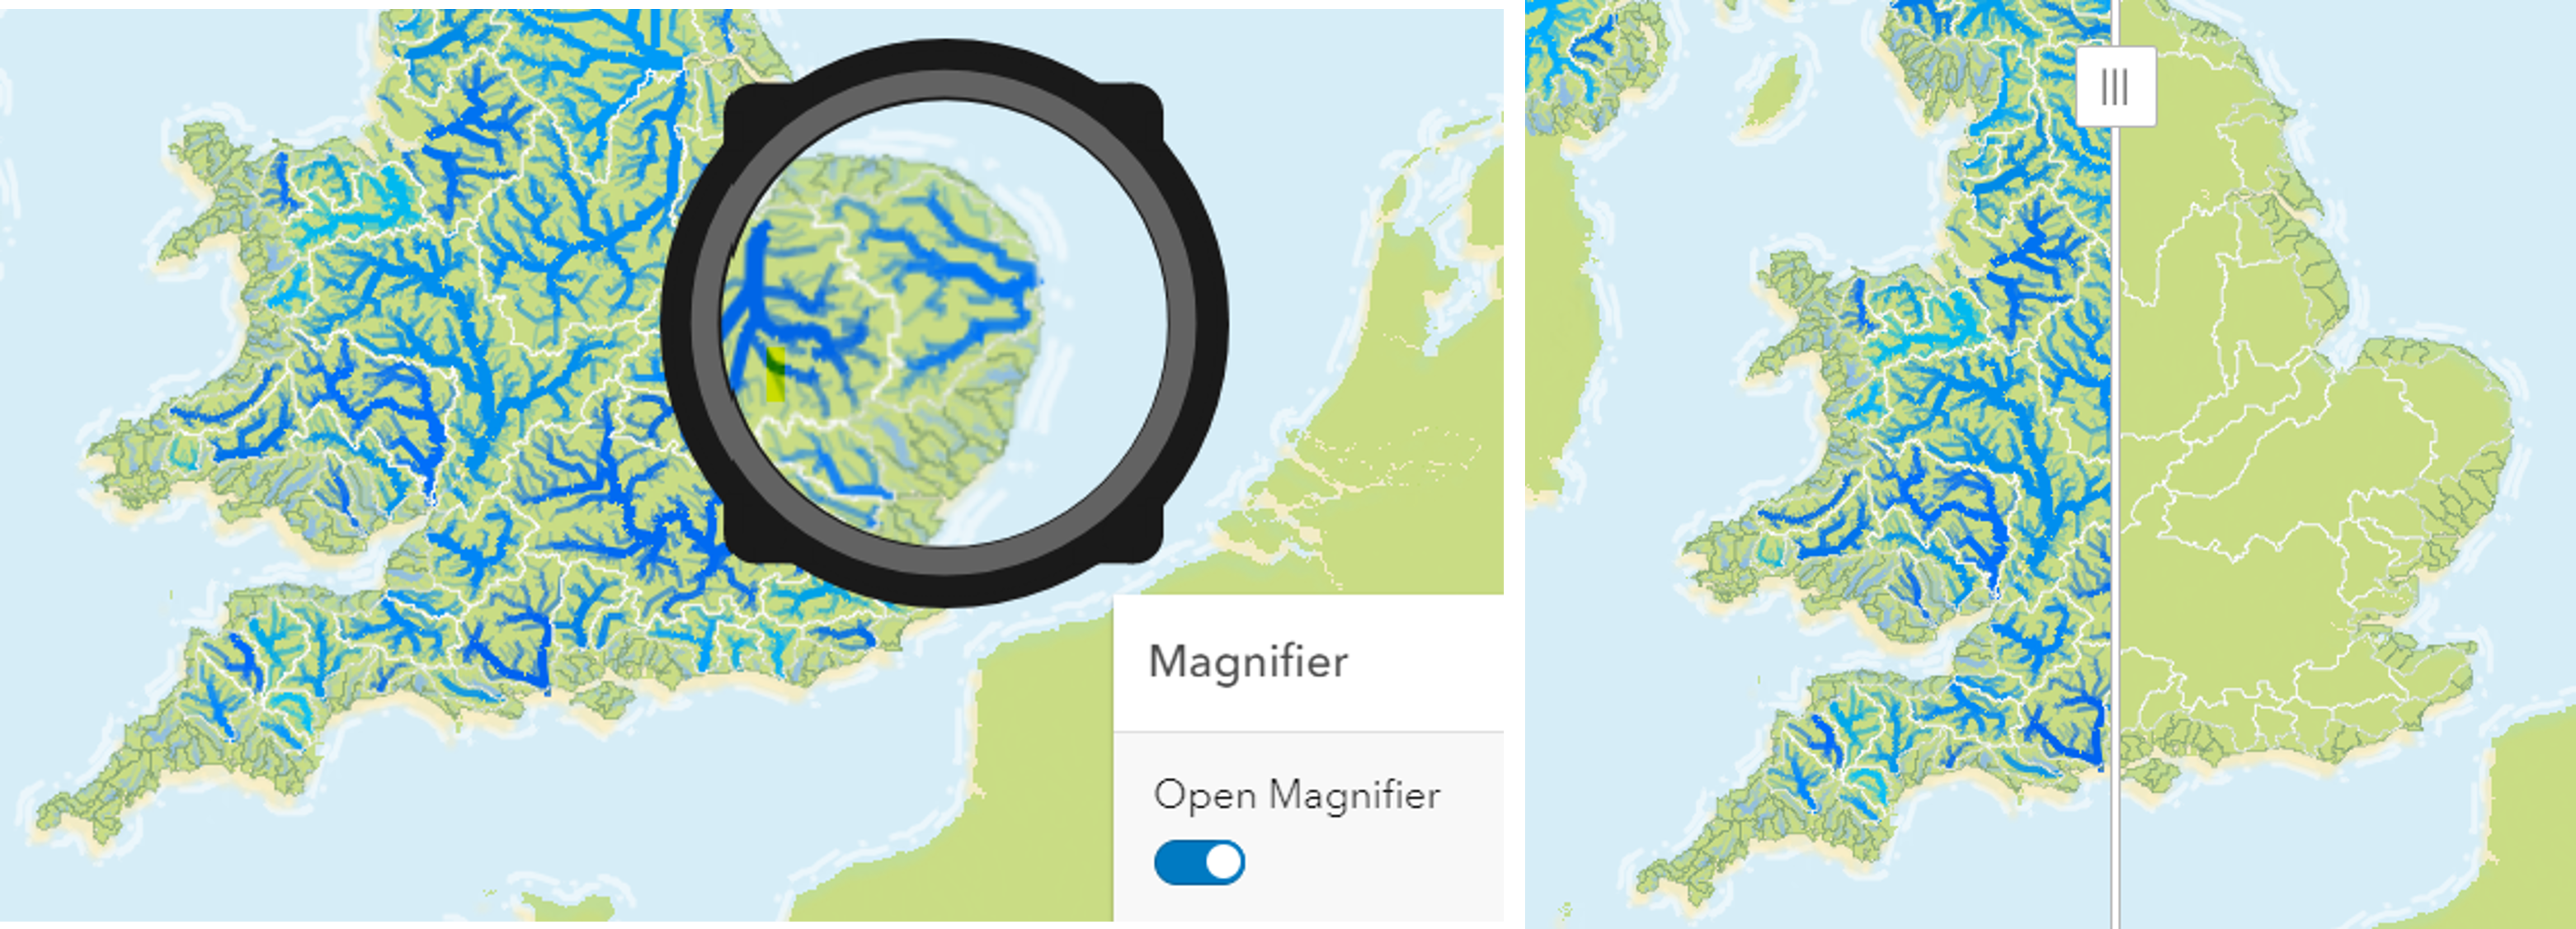 A magnifier icon focused over part of the UK. Blue lines show different river catchments. Slider icon (right). 